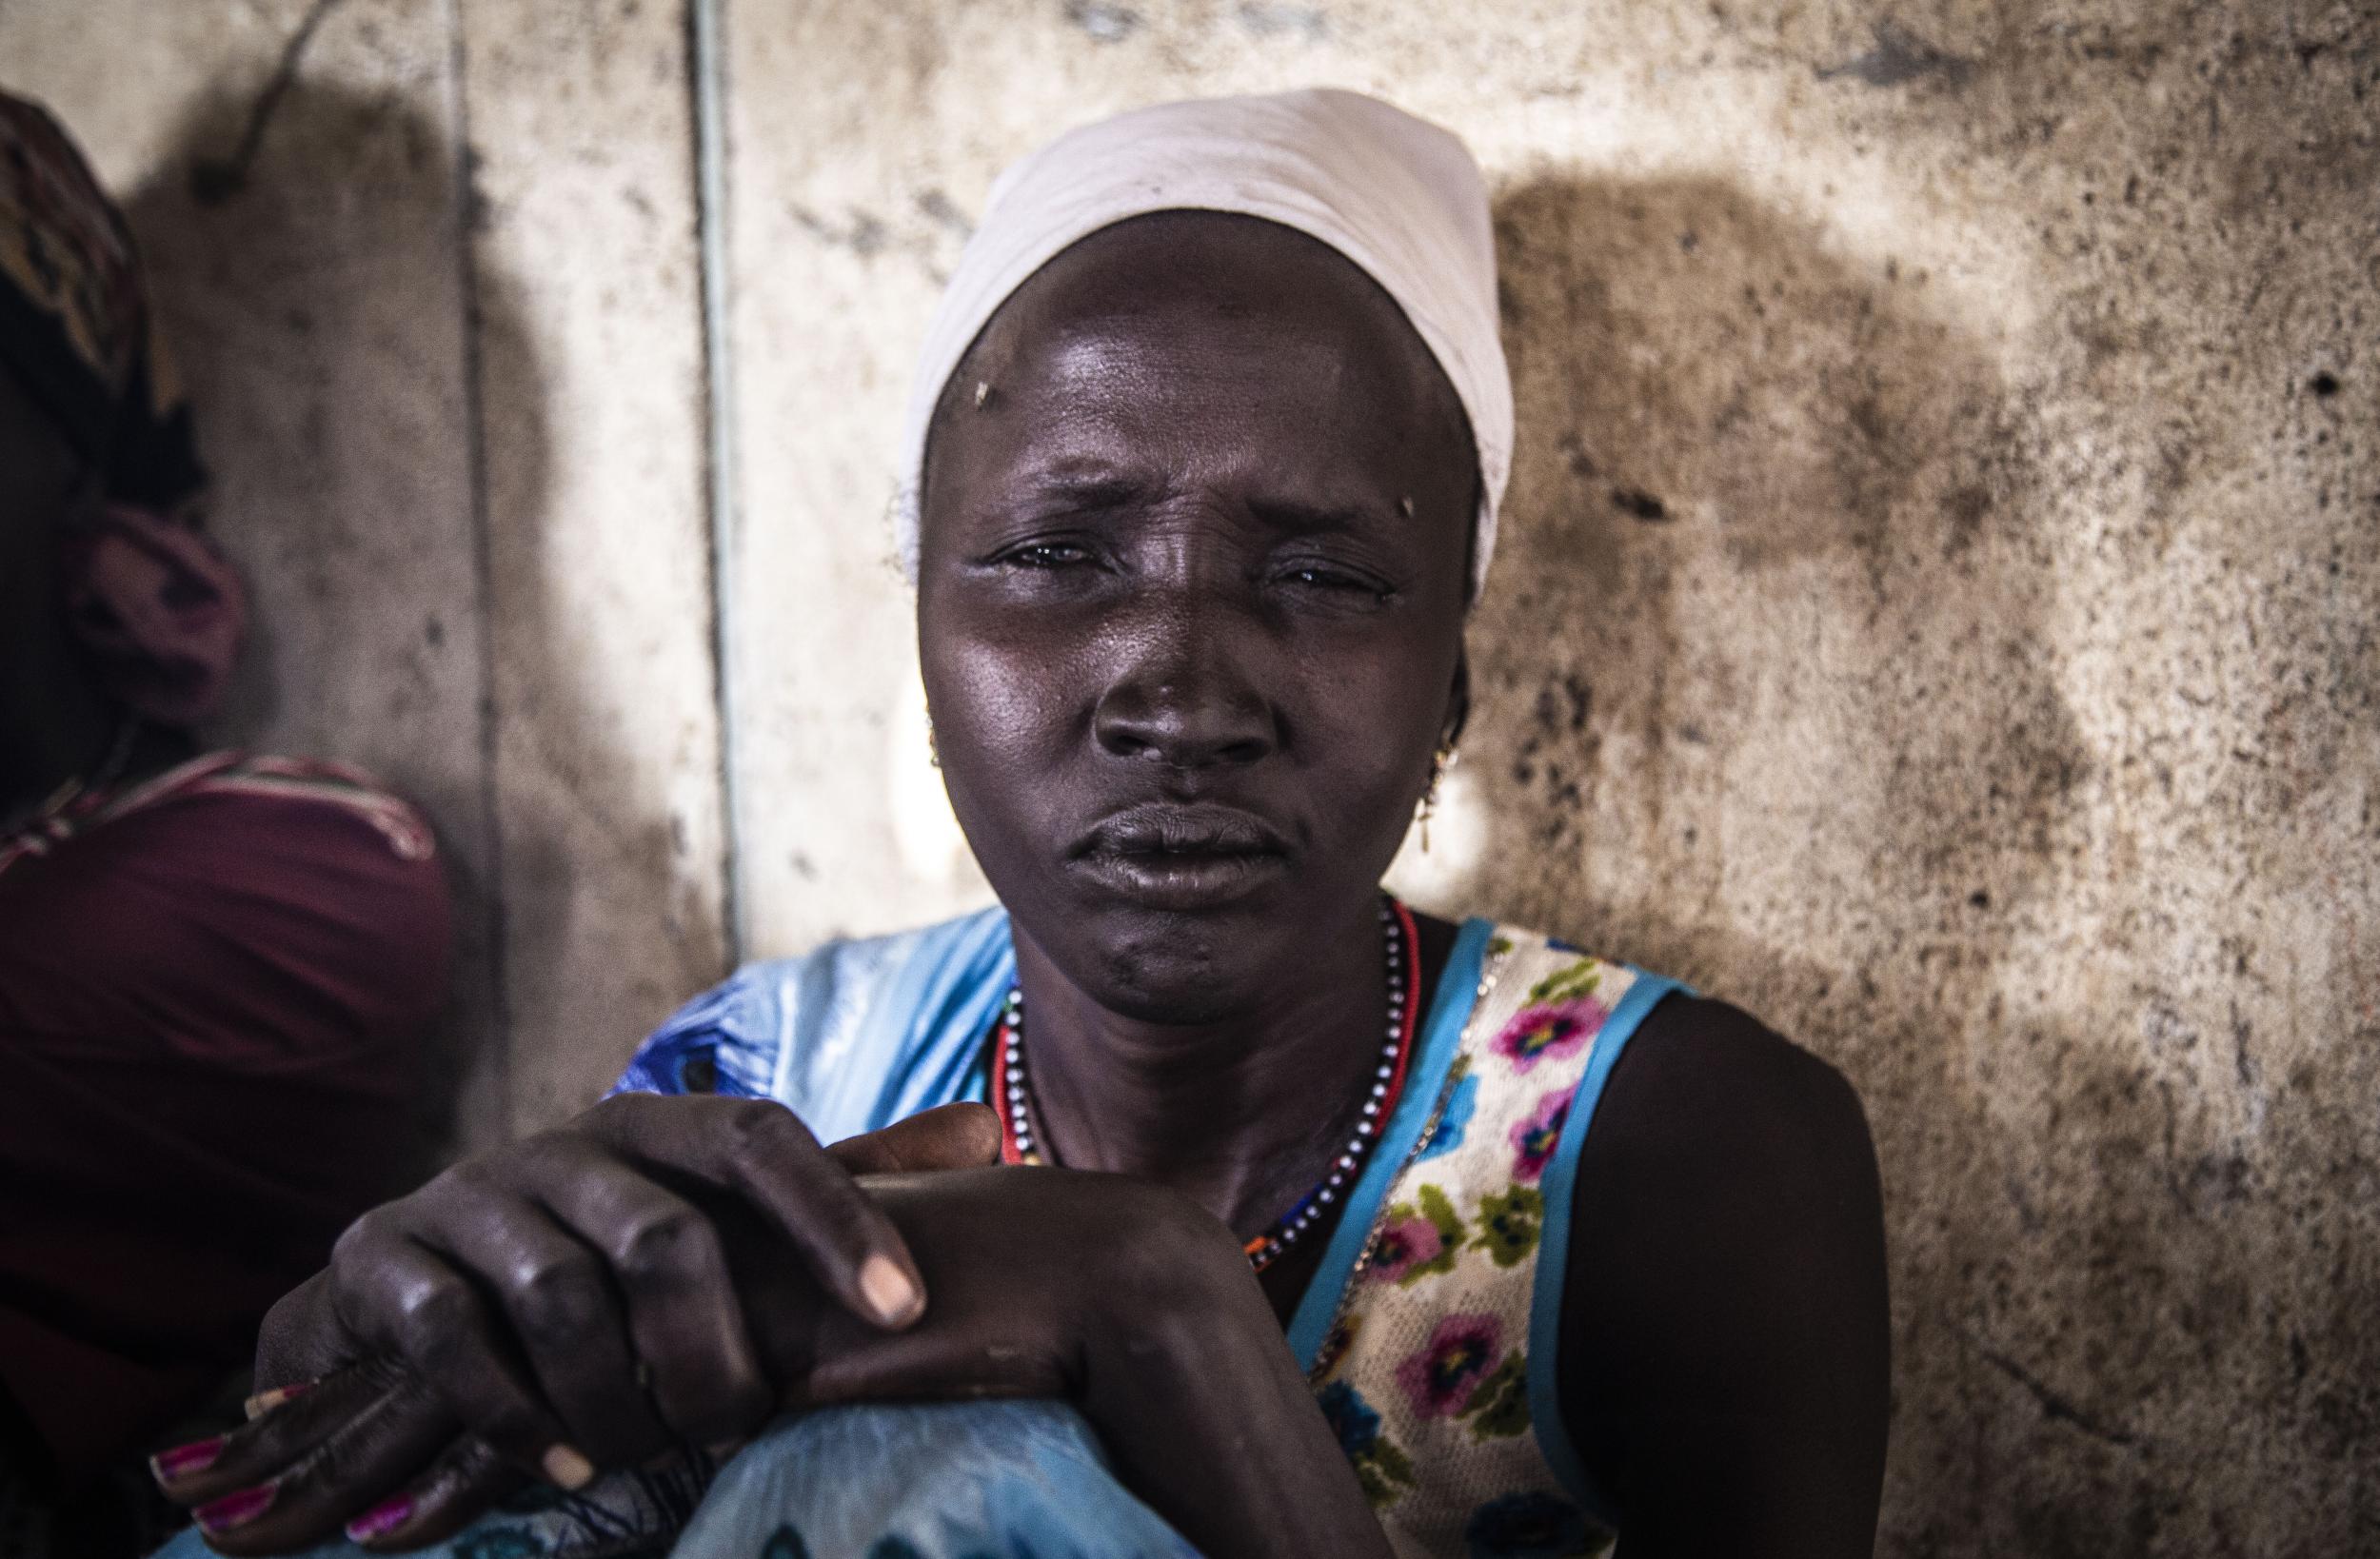 Rebecca, 38, is living off berries in the remote town of Pibor